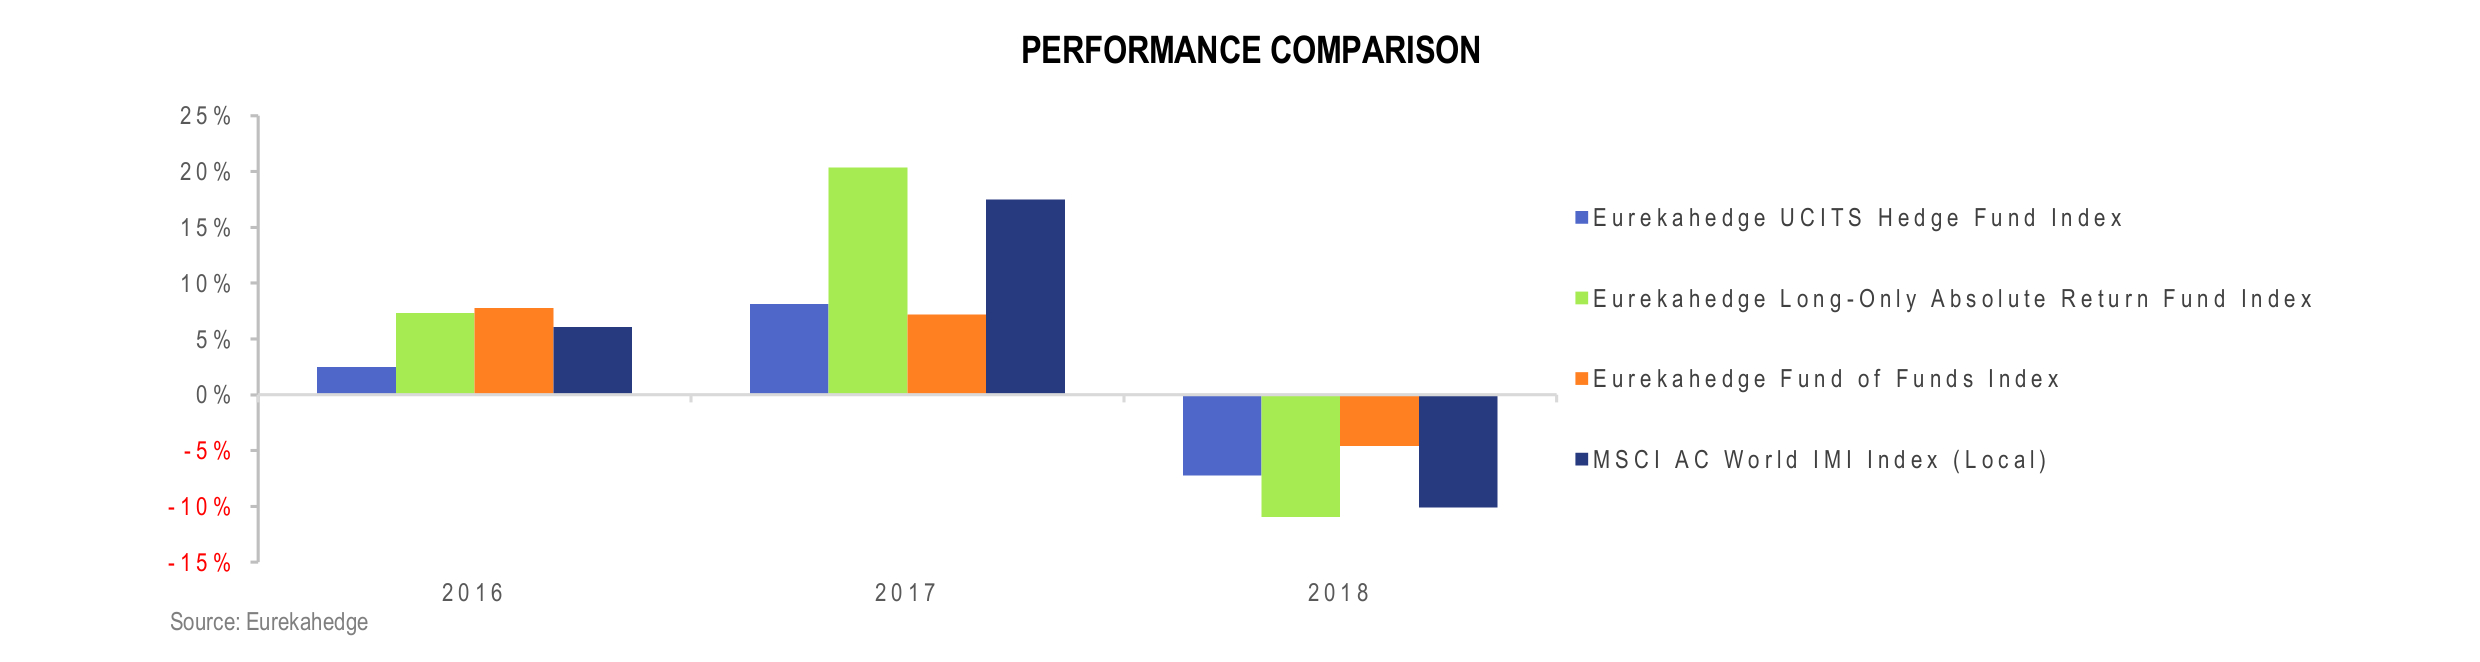 UCITS Hedge Funds Infographic February 2019 - performance comparison